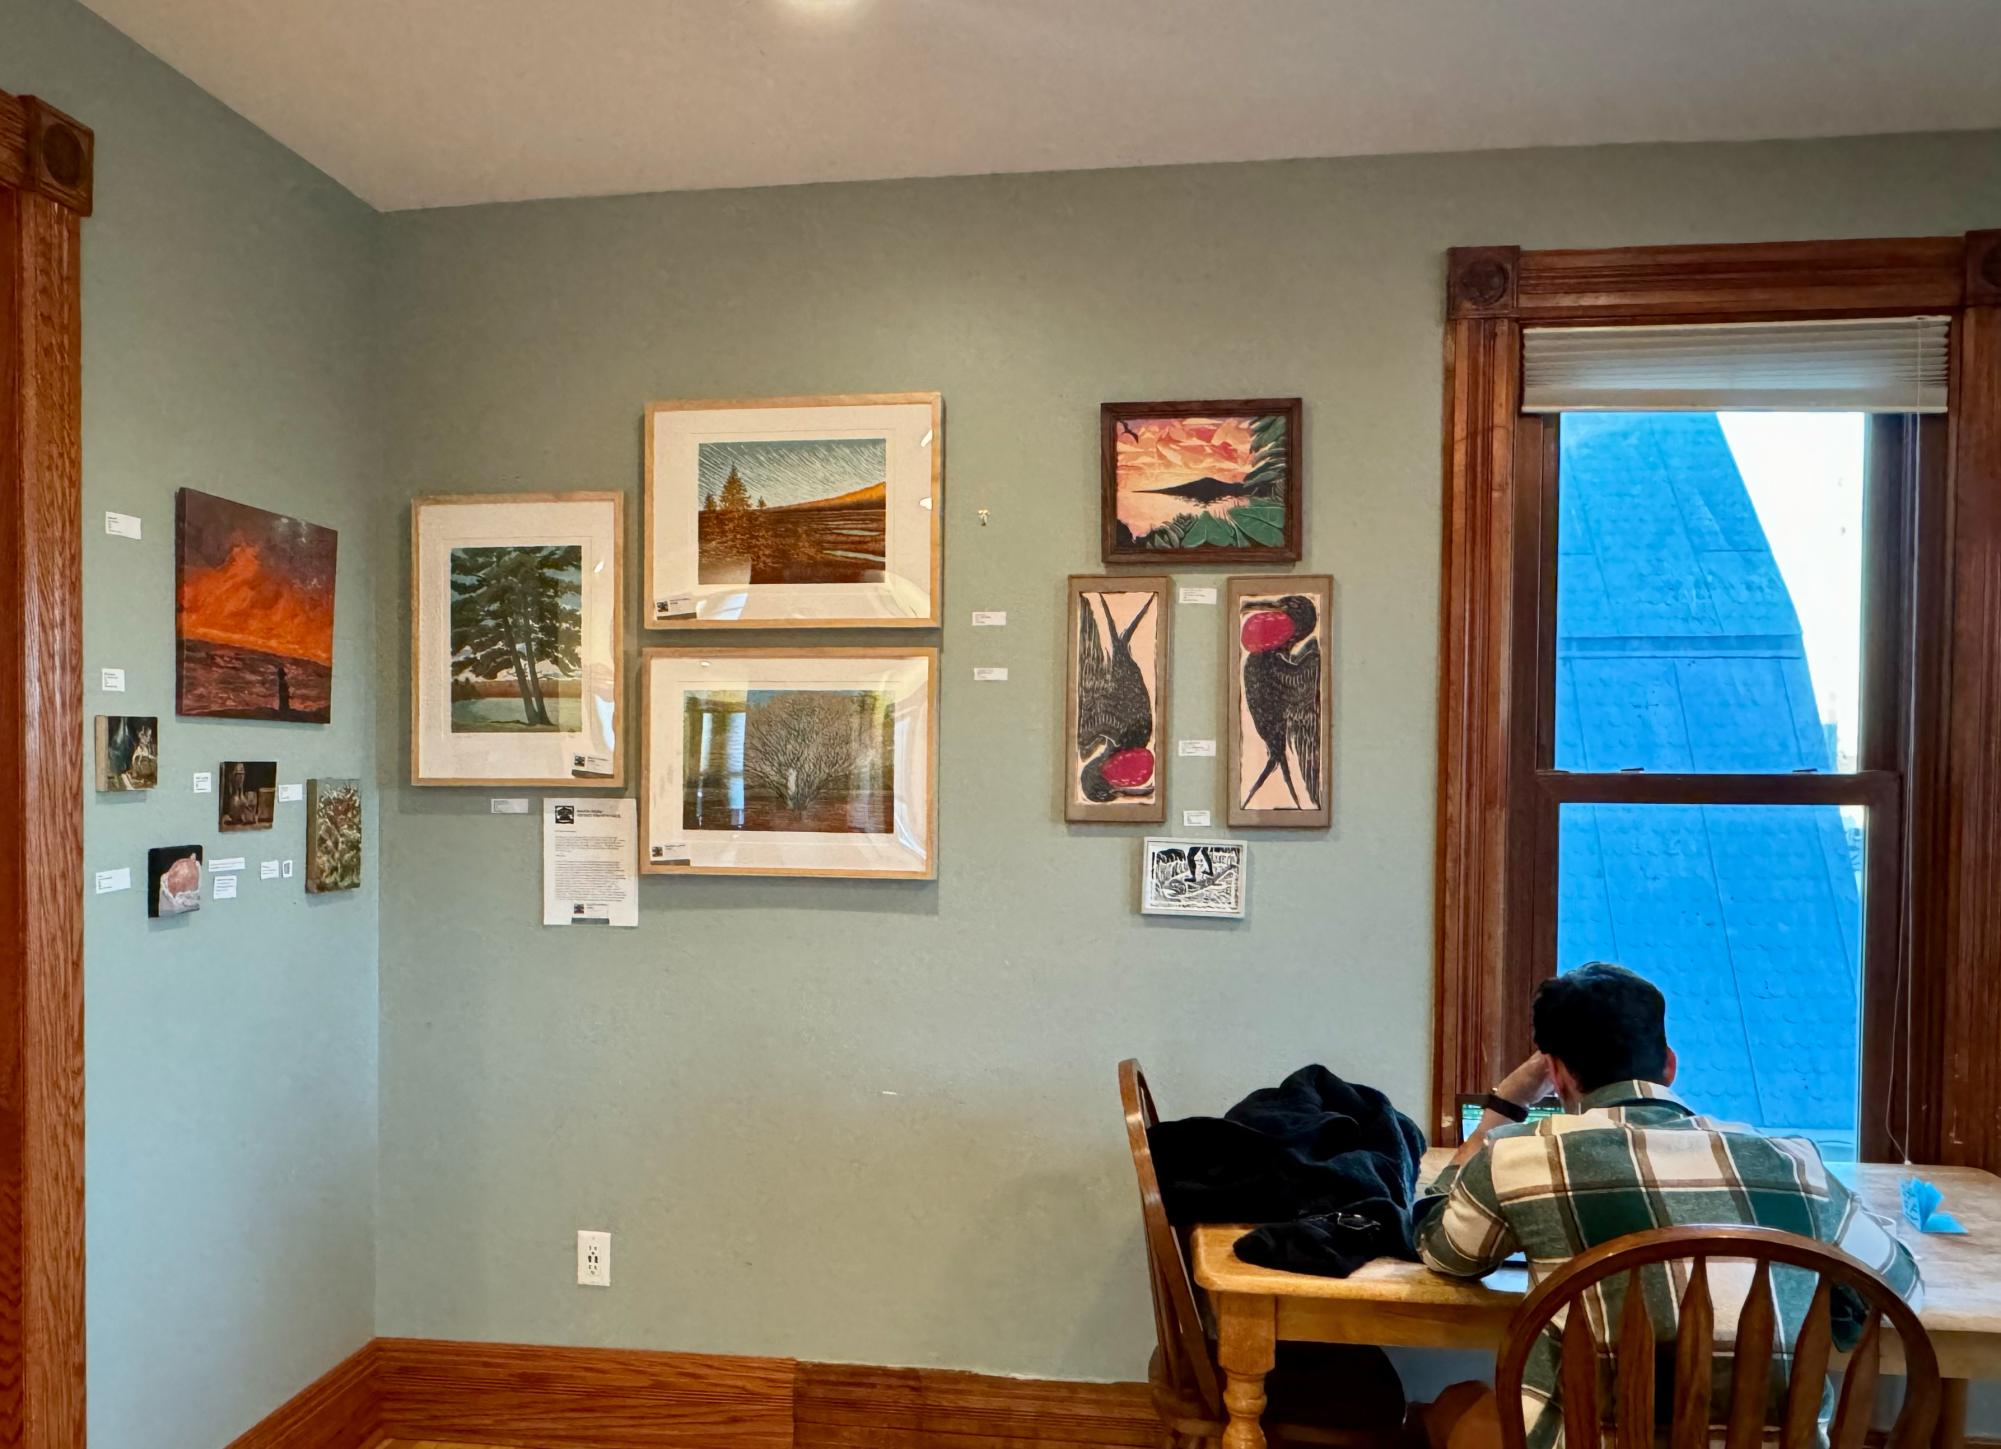 LOCAL ART — Art hung on all the walls in The Crib so people could admire and purchase it as they worked. 